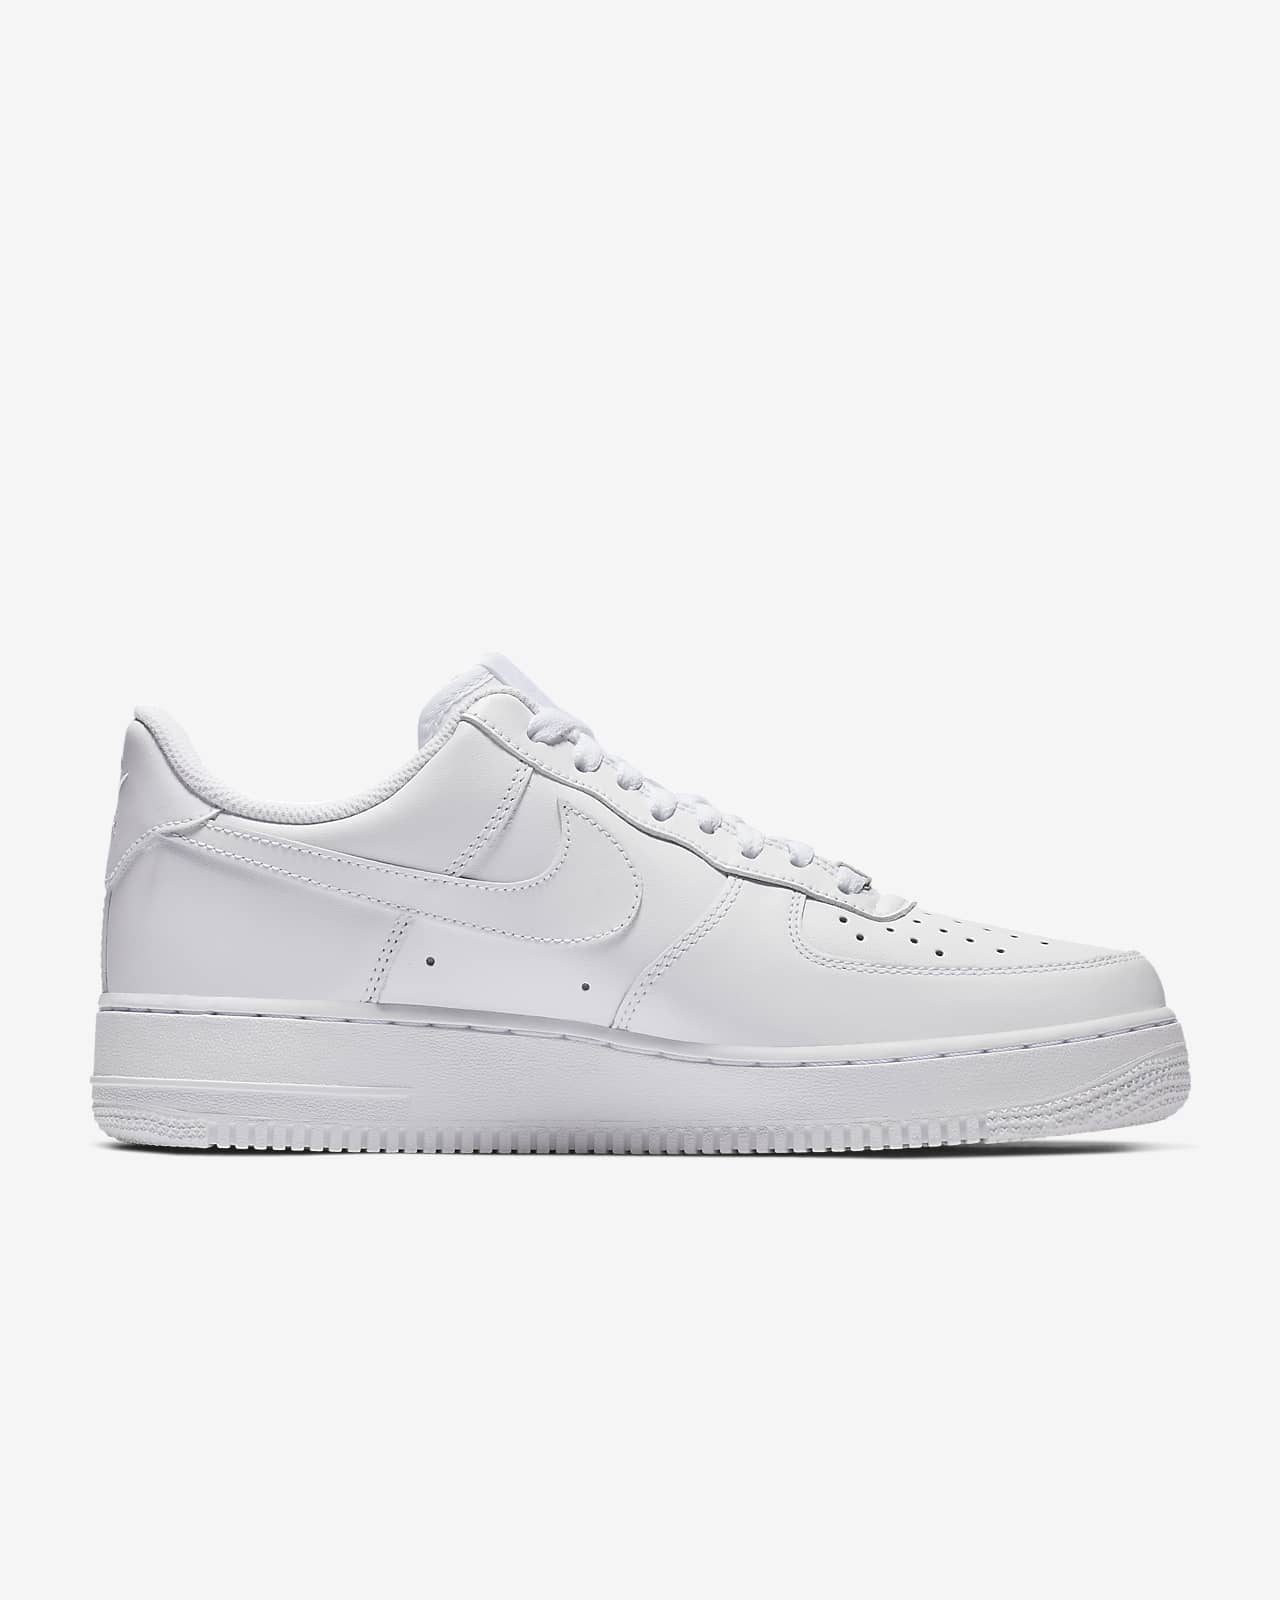 nike air force 1 07 women's white size 